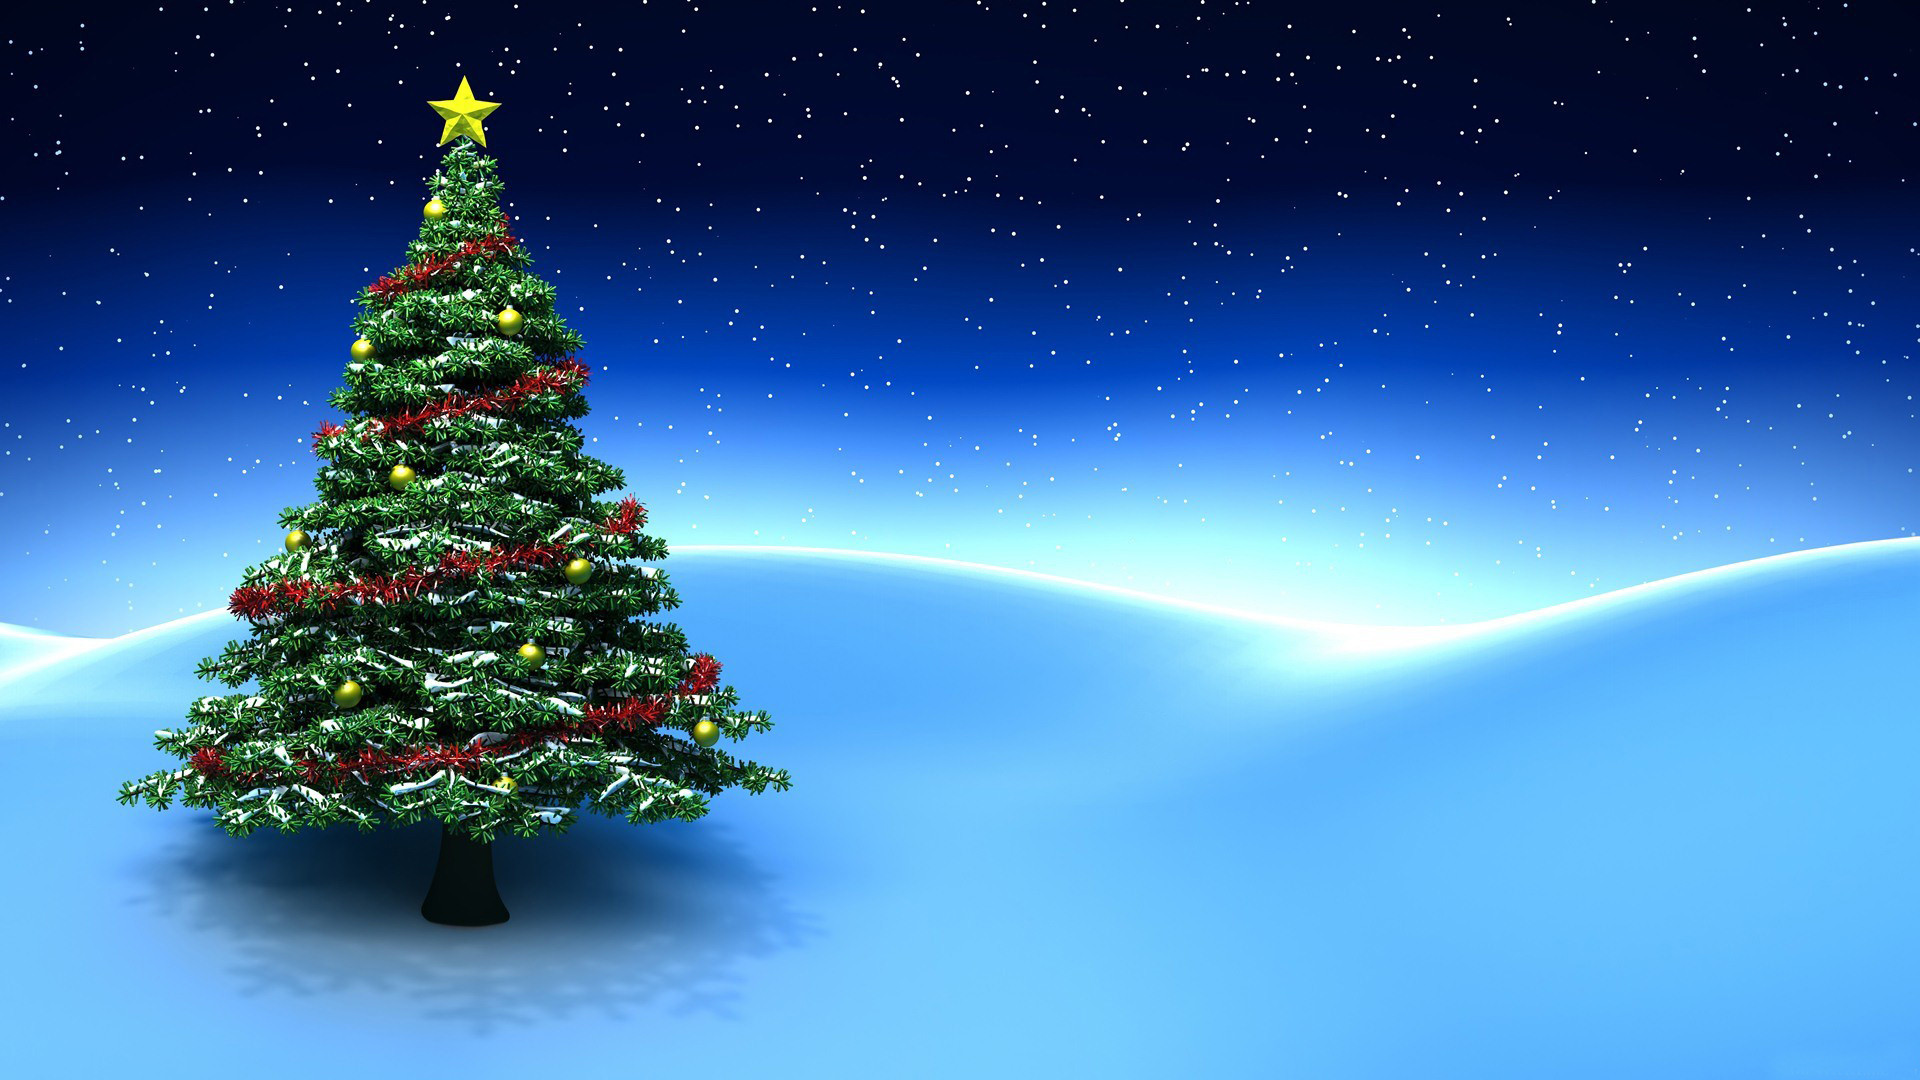 1920x1080 Christmas Tree Backgrounds Wallpapers WIN10 THEMES 